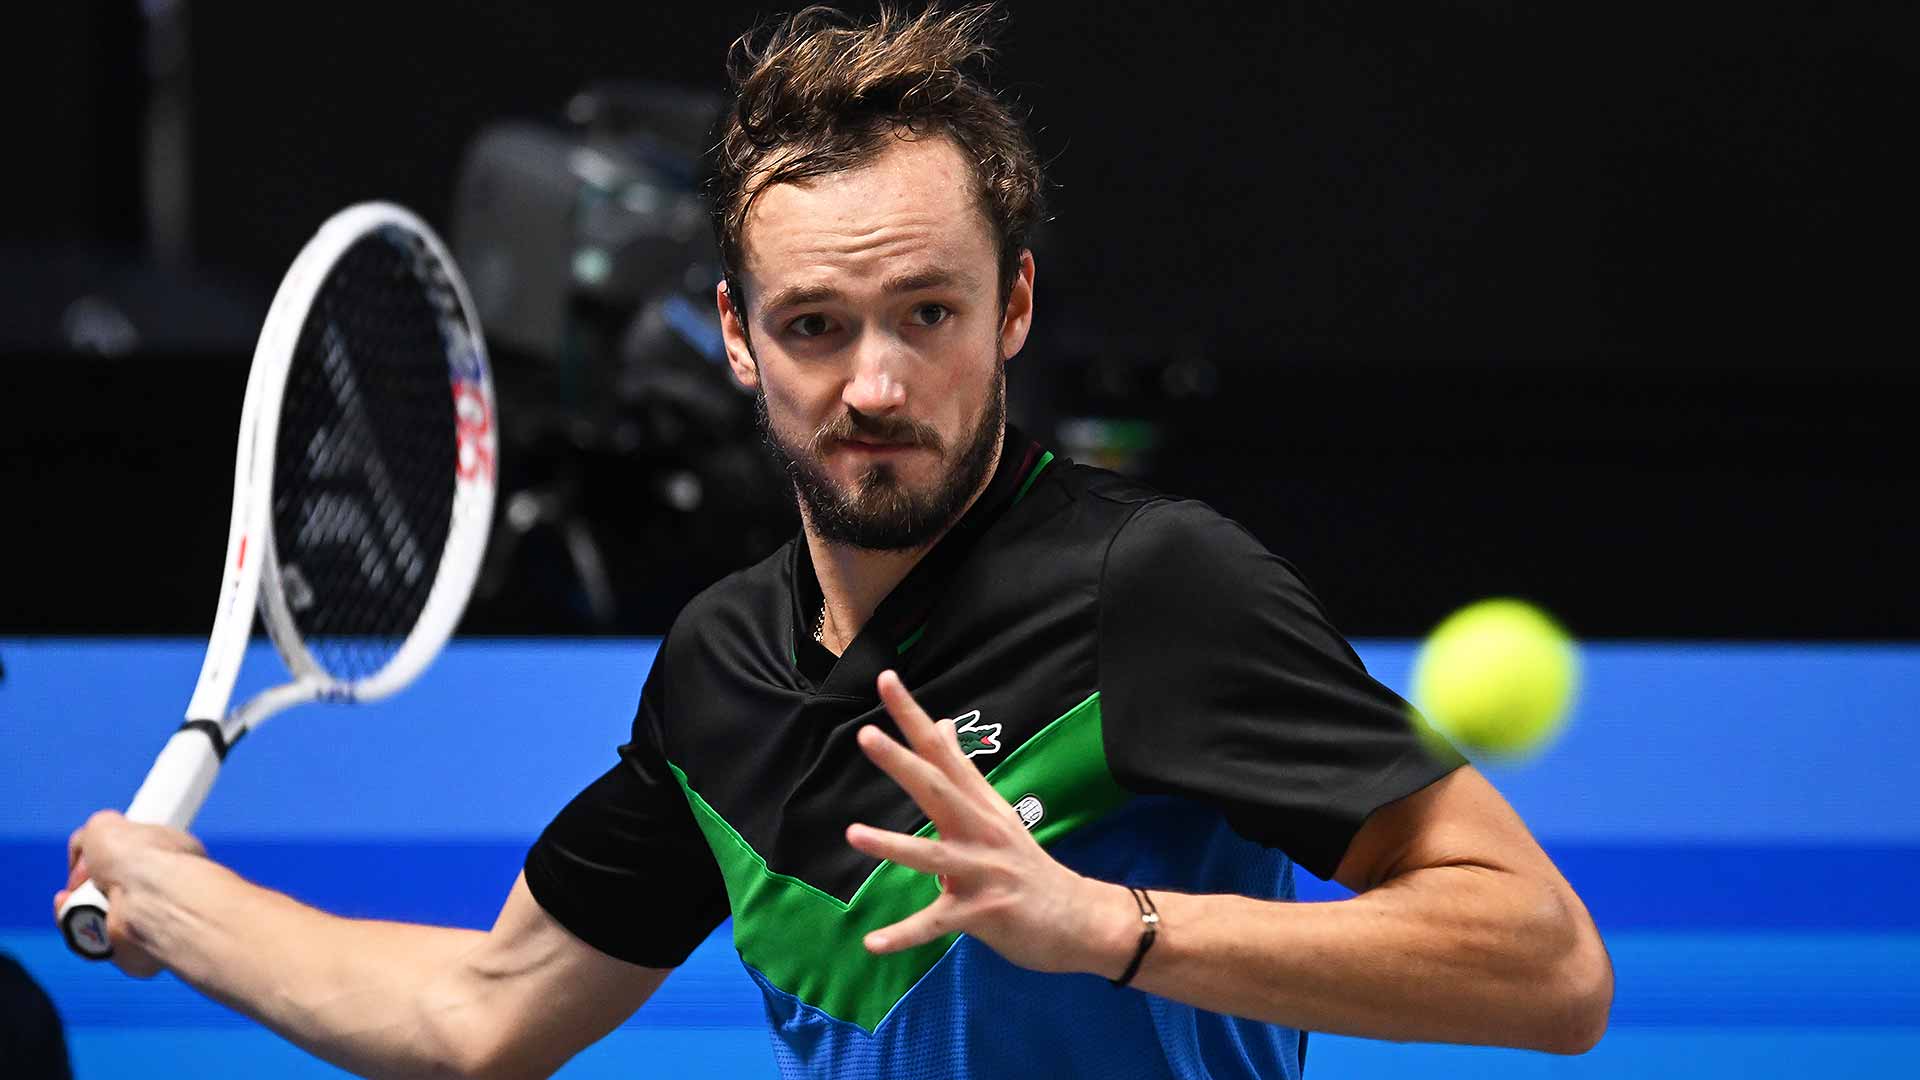 Daniil Medvedev won two titles from three finals at ATP 500 level this year.